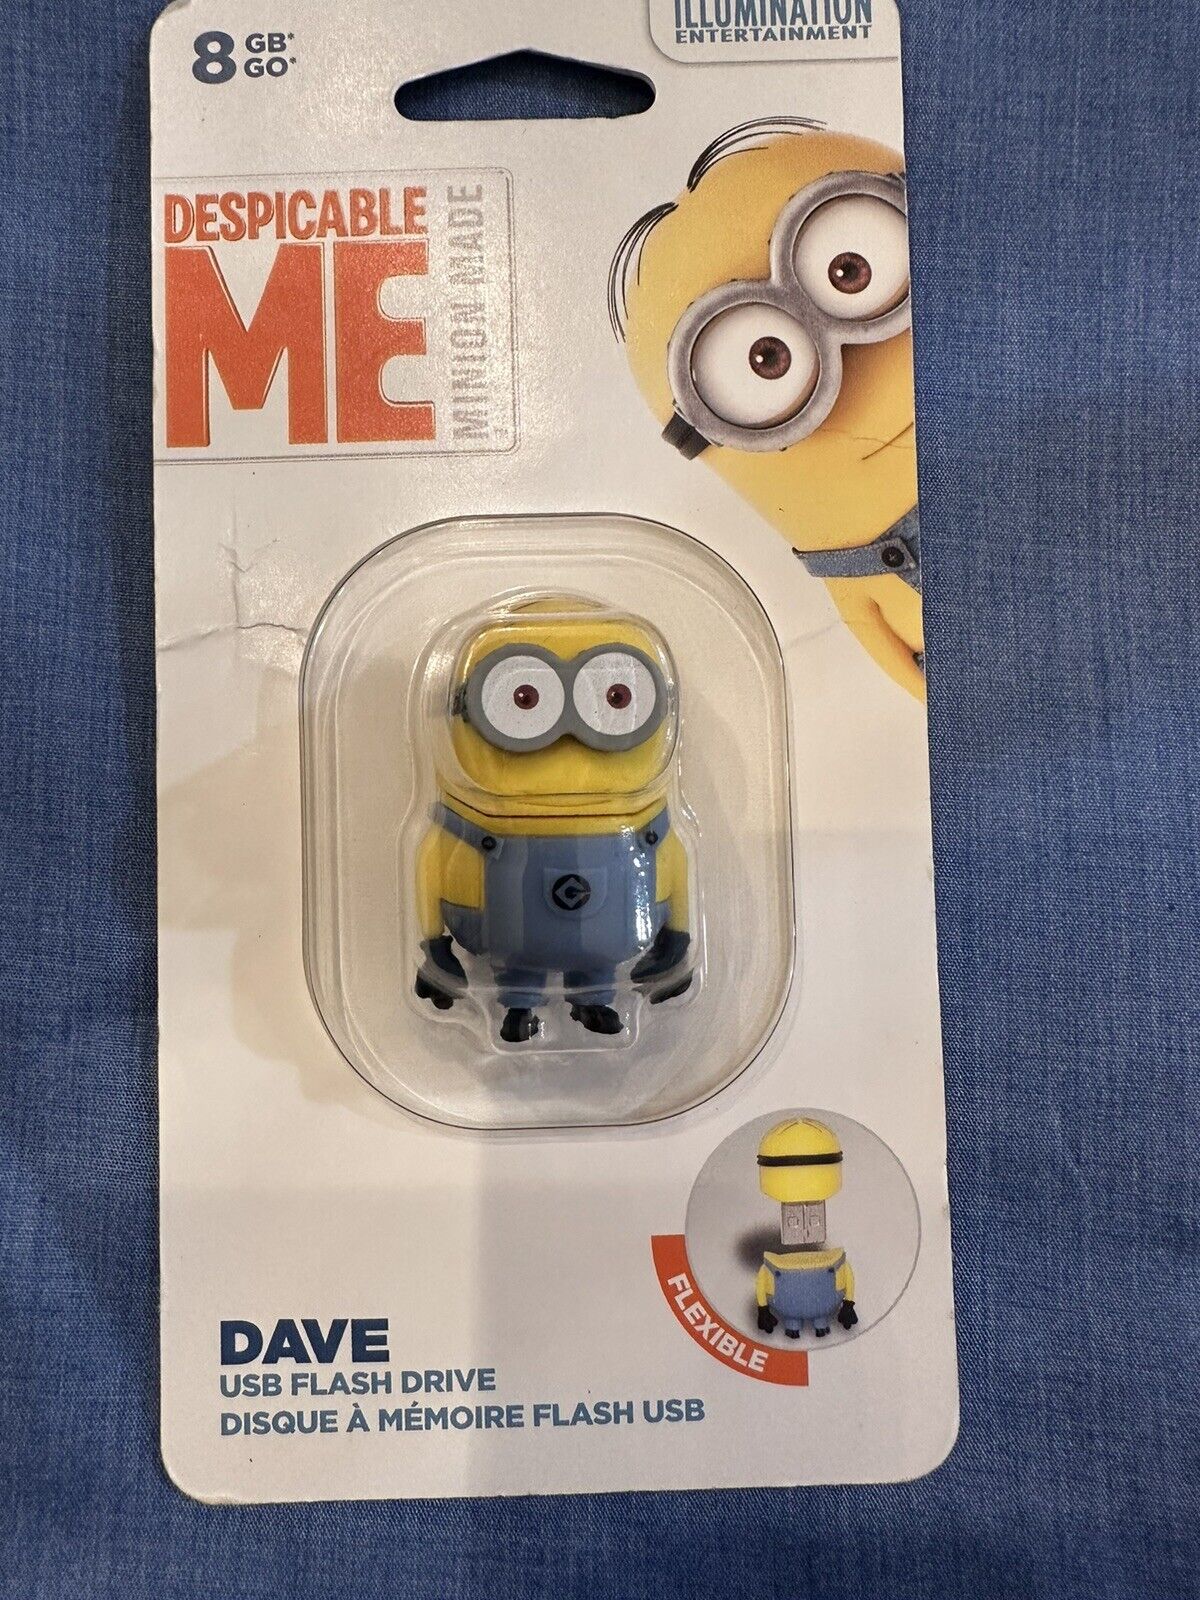 Despicable Me 2 8 GB DAVE Flash Drive NEW SEALED 